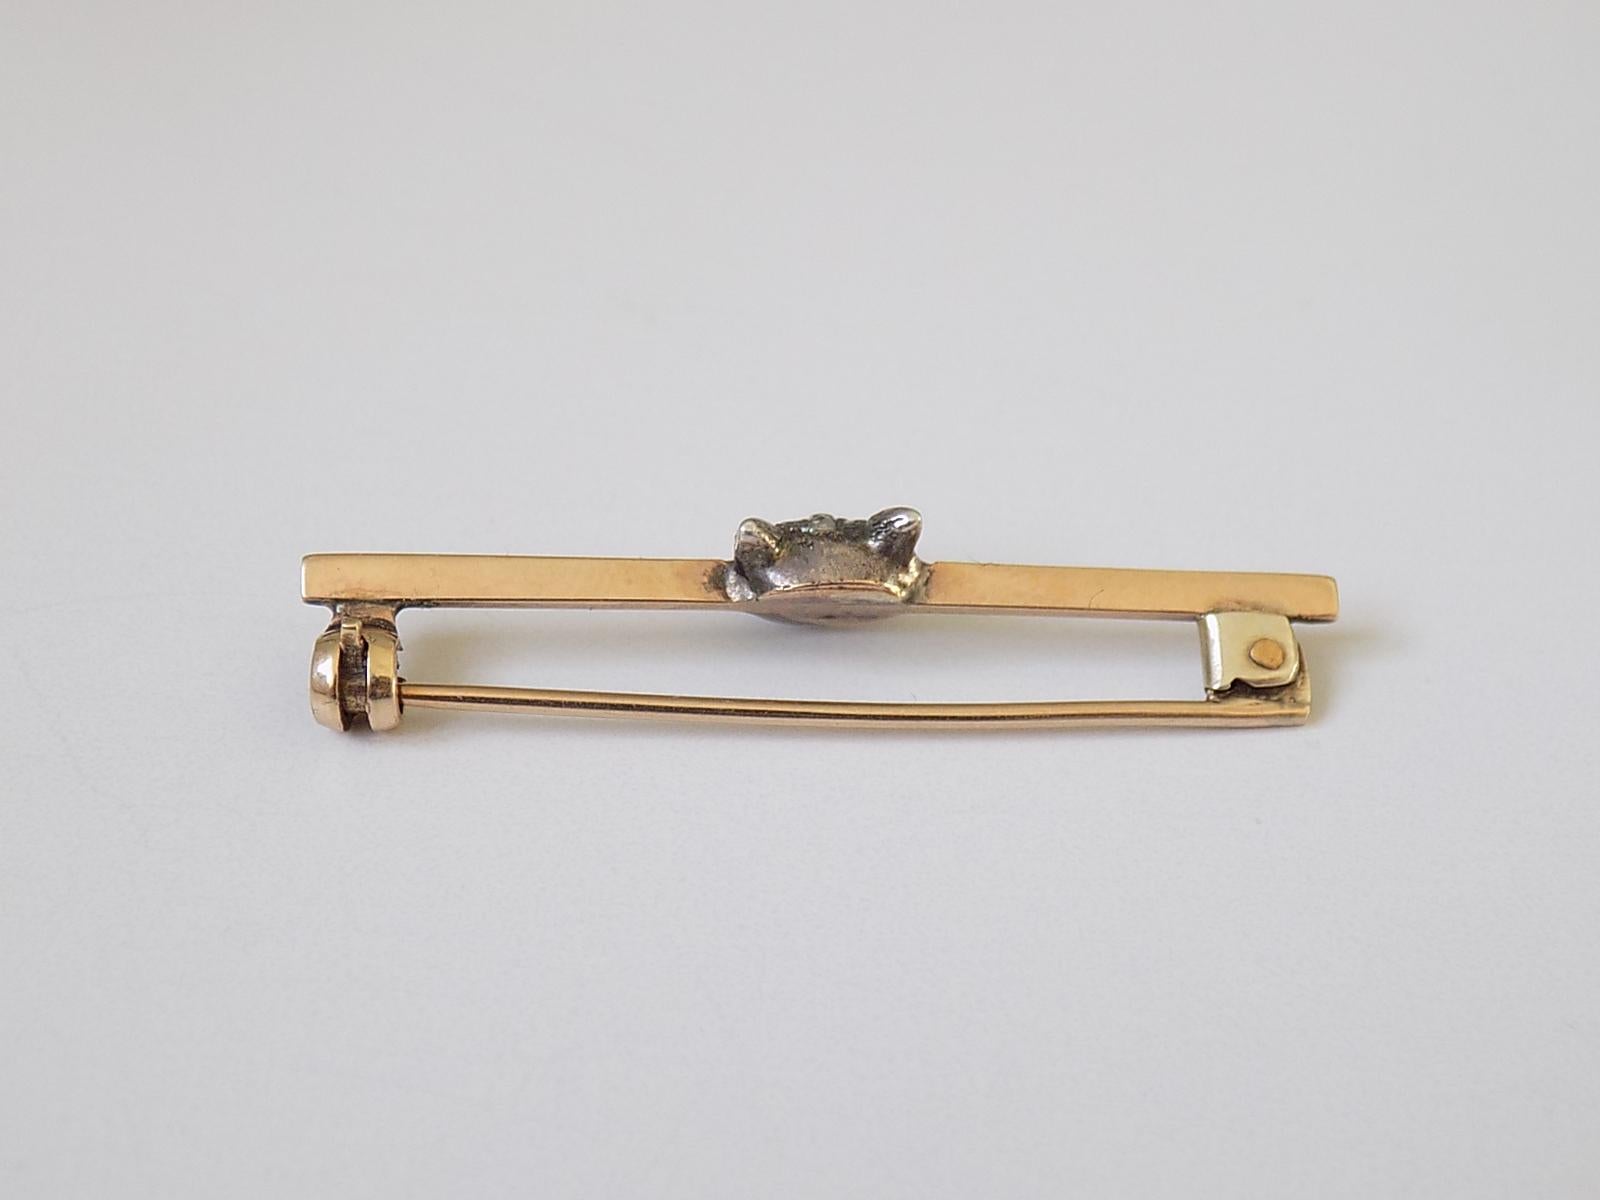 A Victorian c.1890 Rose cut Diamond Fox head bar brooch in Silver and 9 Carat Gold. English origin.
Width of the Fox head 7mm .
Total length of the brooch 38mm.
Unmarked.
The brooch in excellent condition for the age, fully complete with stones.